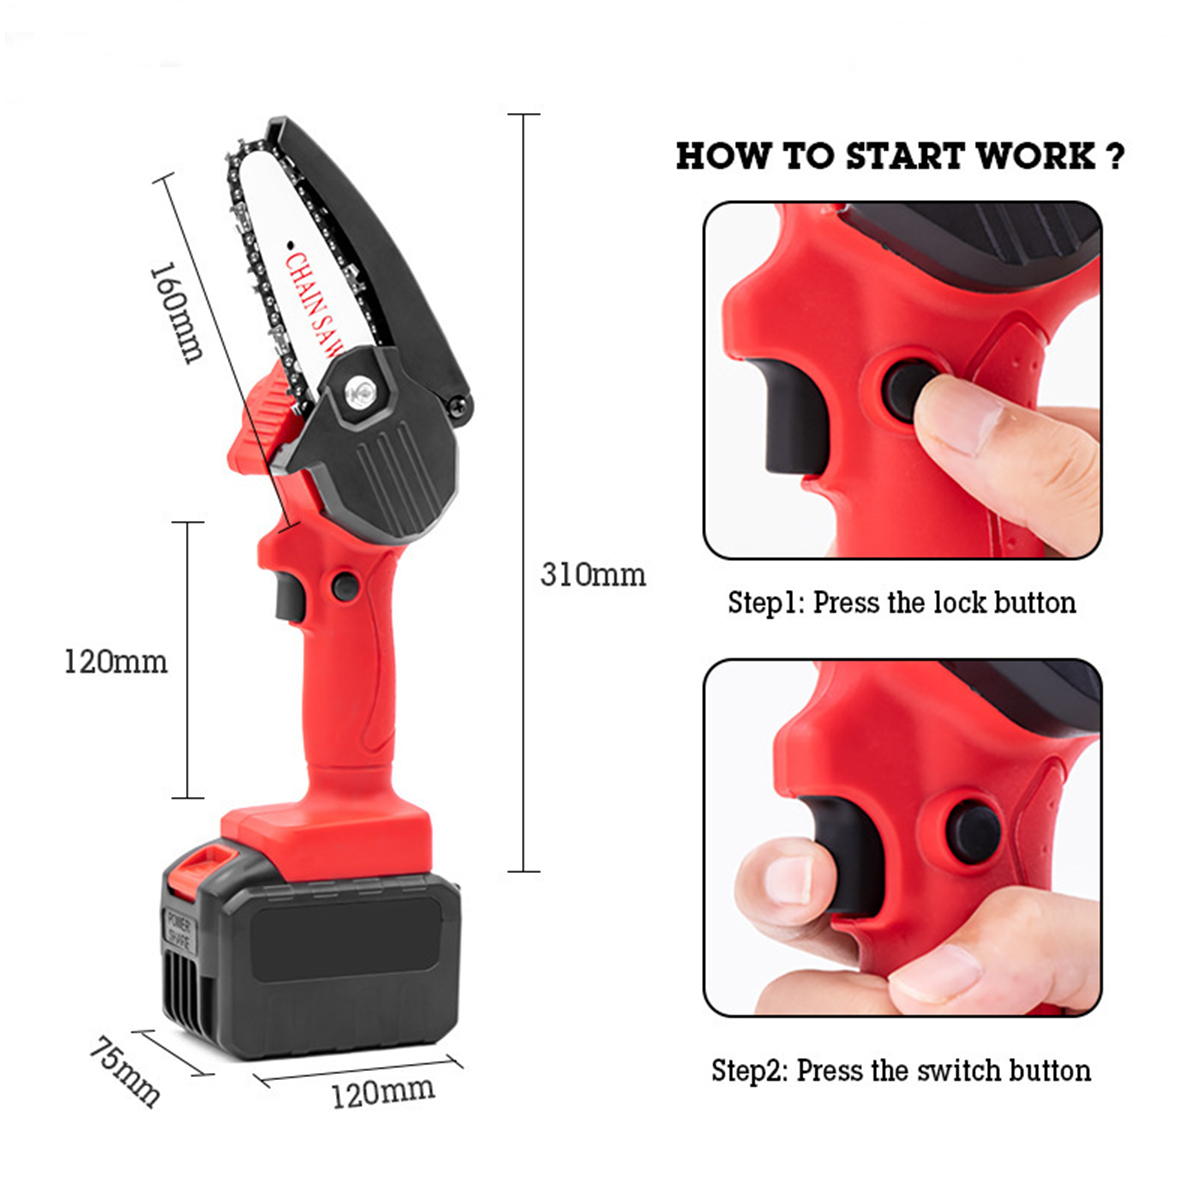 Portable-Electric-Saw-Woodworking-Chain-Saw-Tree-Pruning-Tool-for-18V-MakitaIzumi-Battery-1764621-9